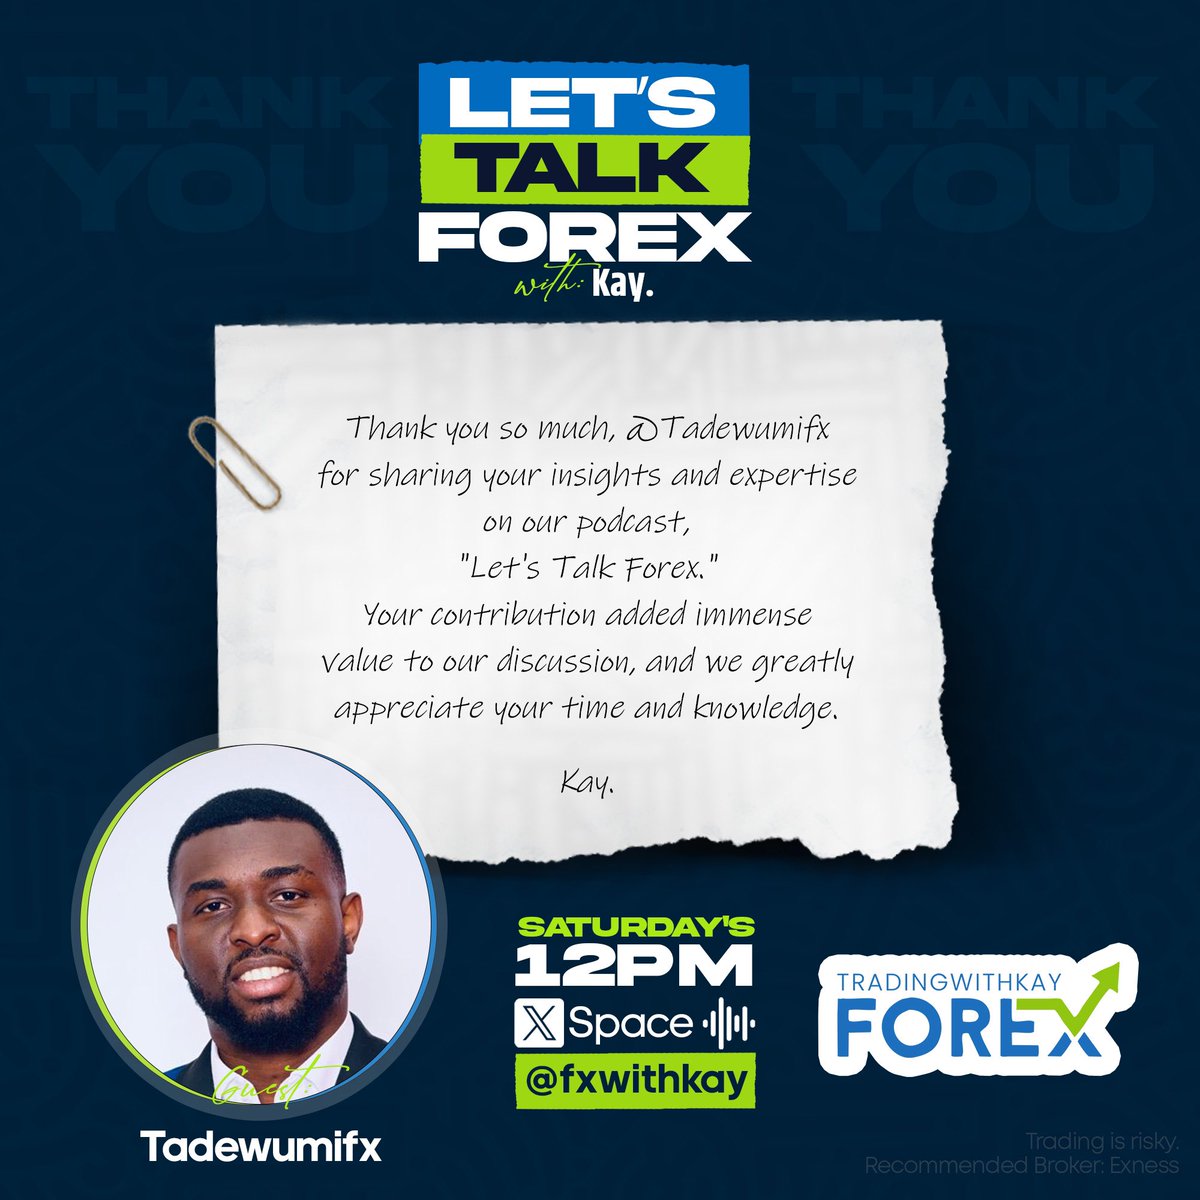 Huge thanks to @topeadewumii for joining us on our podcast, 'Let's Talk Forex.' Your expertise was invaluable! Looking forward to future collaborations! #ForexPodcast #TradingTalks #ExpertInsights #LetsTalkForex